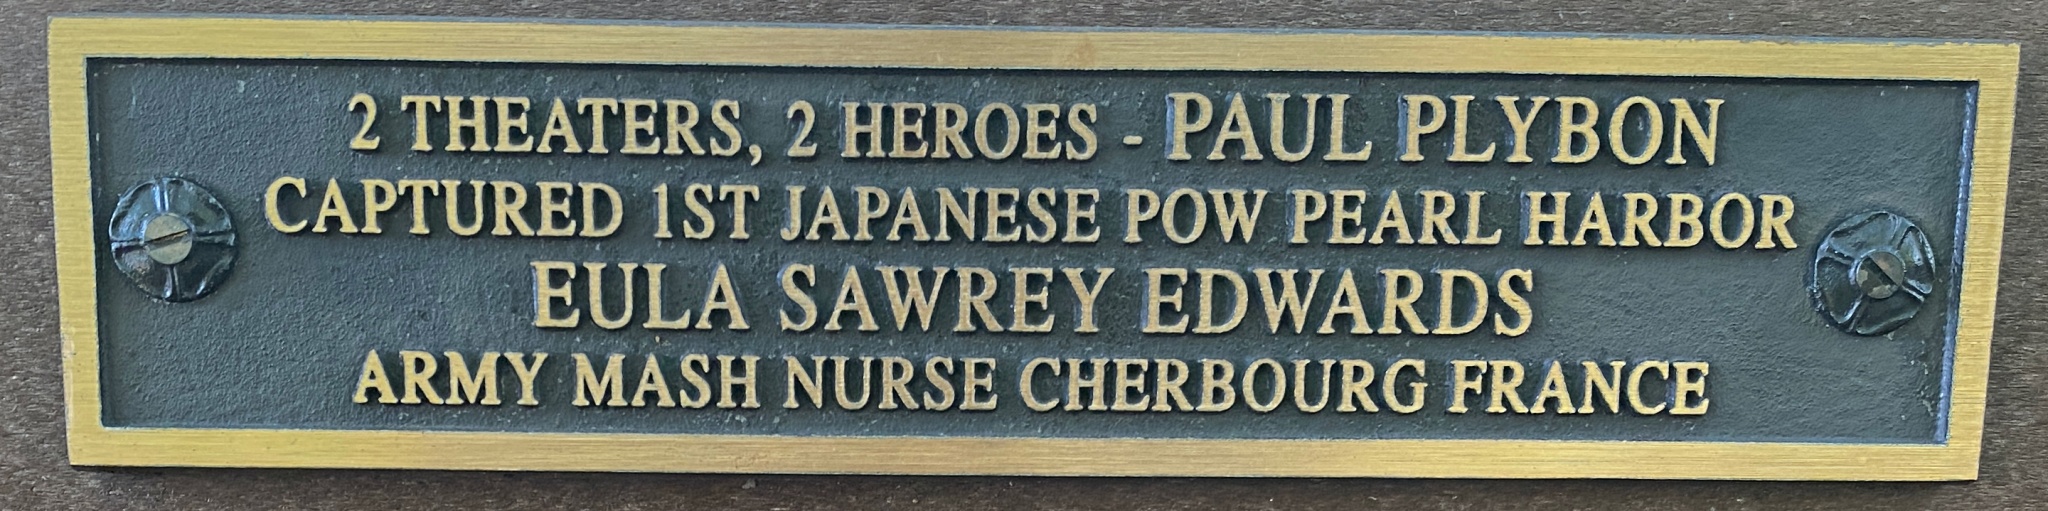 2 THEATERS, 2 HEROES – PAUL PLAYBON CAPTURED 1ST JAPANESE POW PEARL HARBOR EULA SAWREY EDWARDS ARMY MASH NURSE CHERBOURG FRANCE